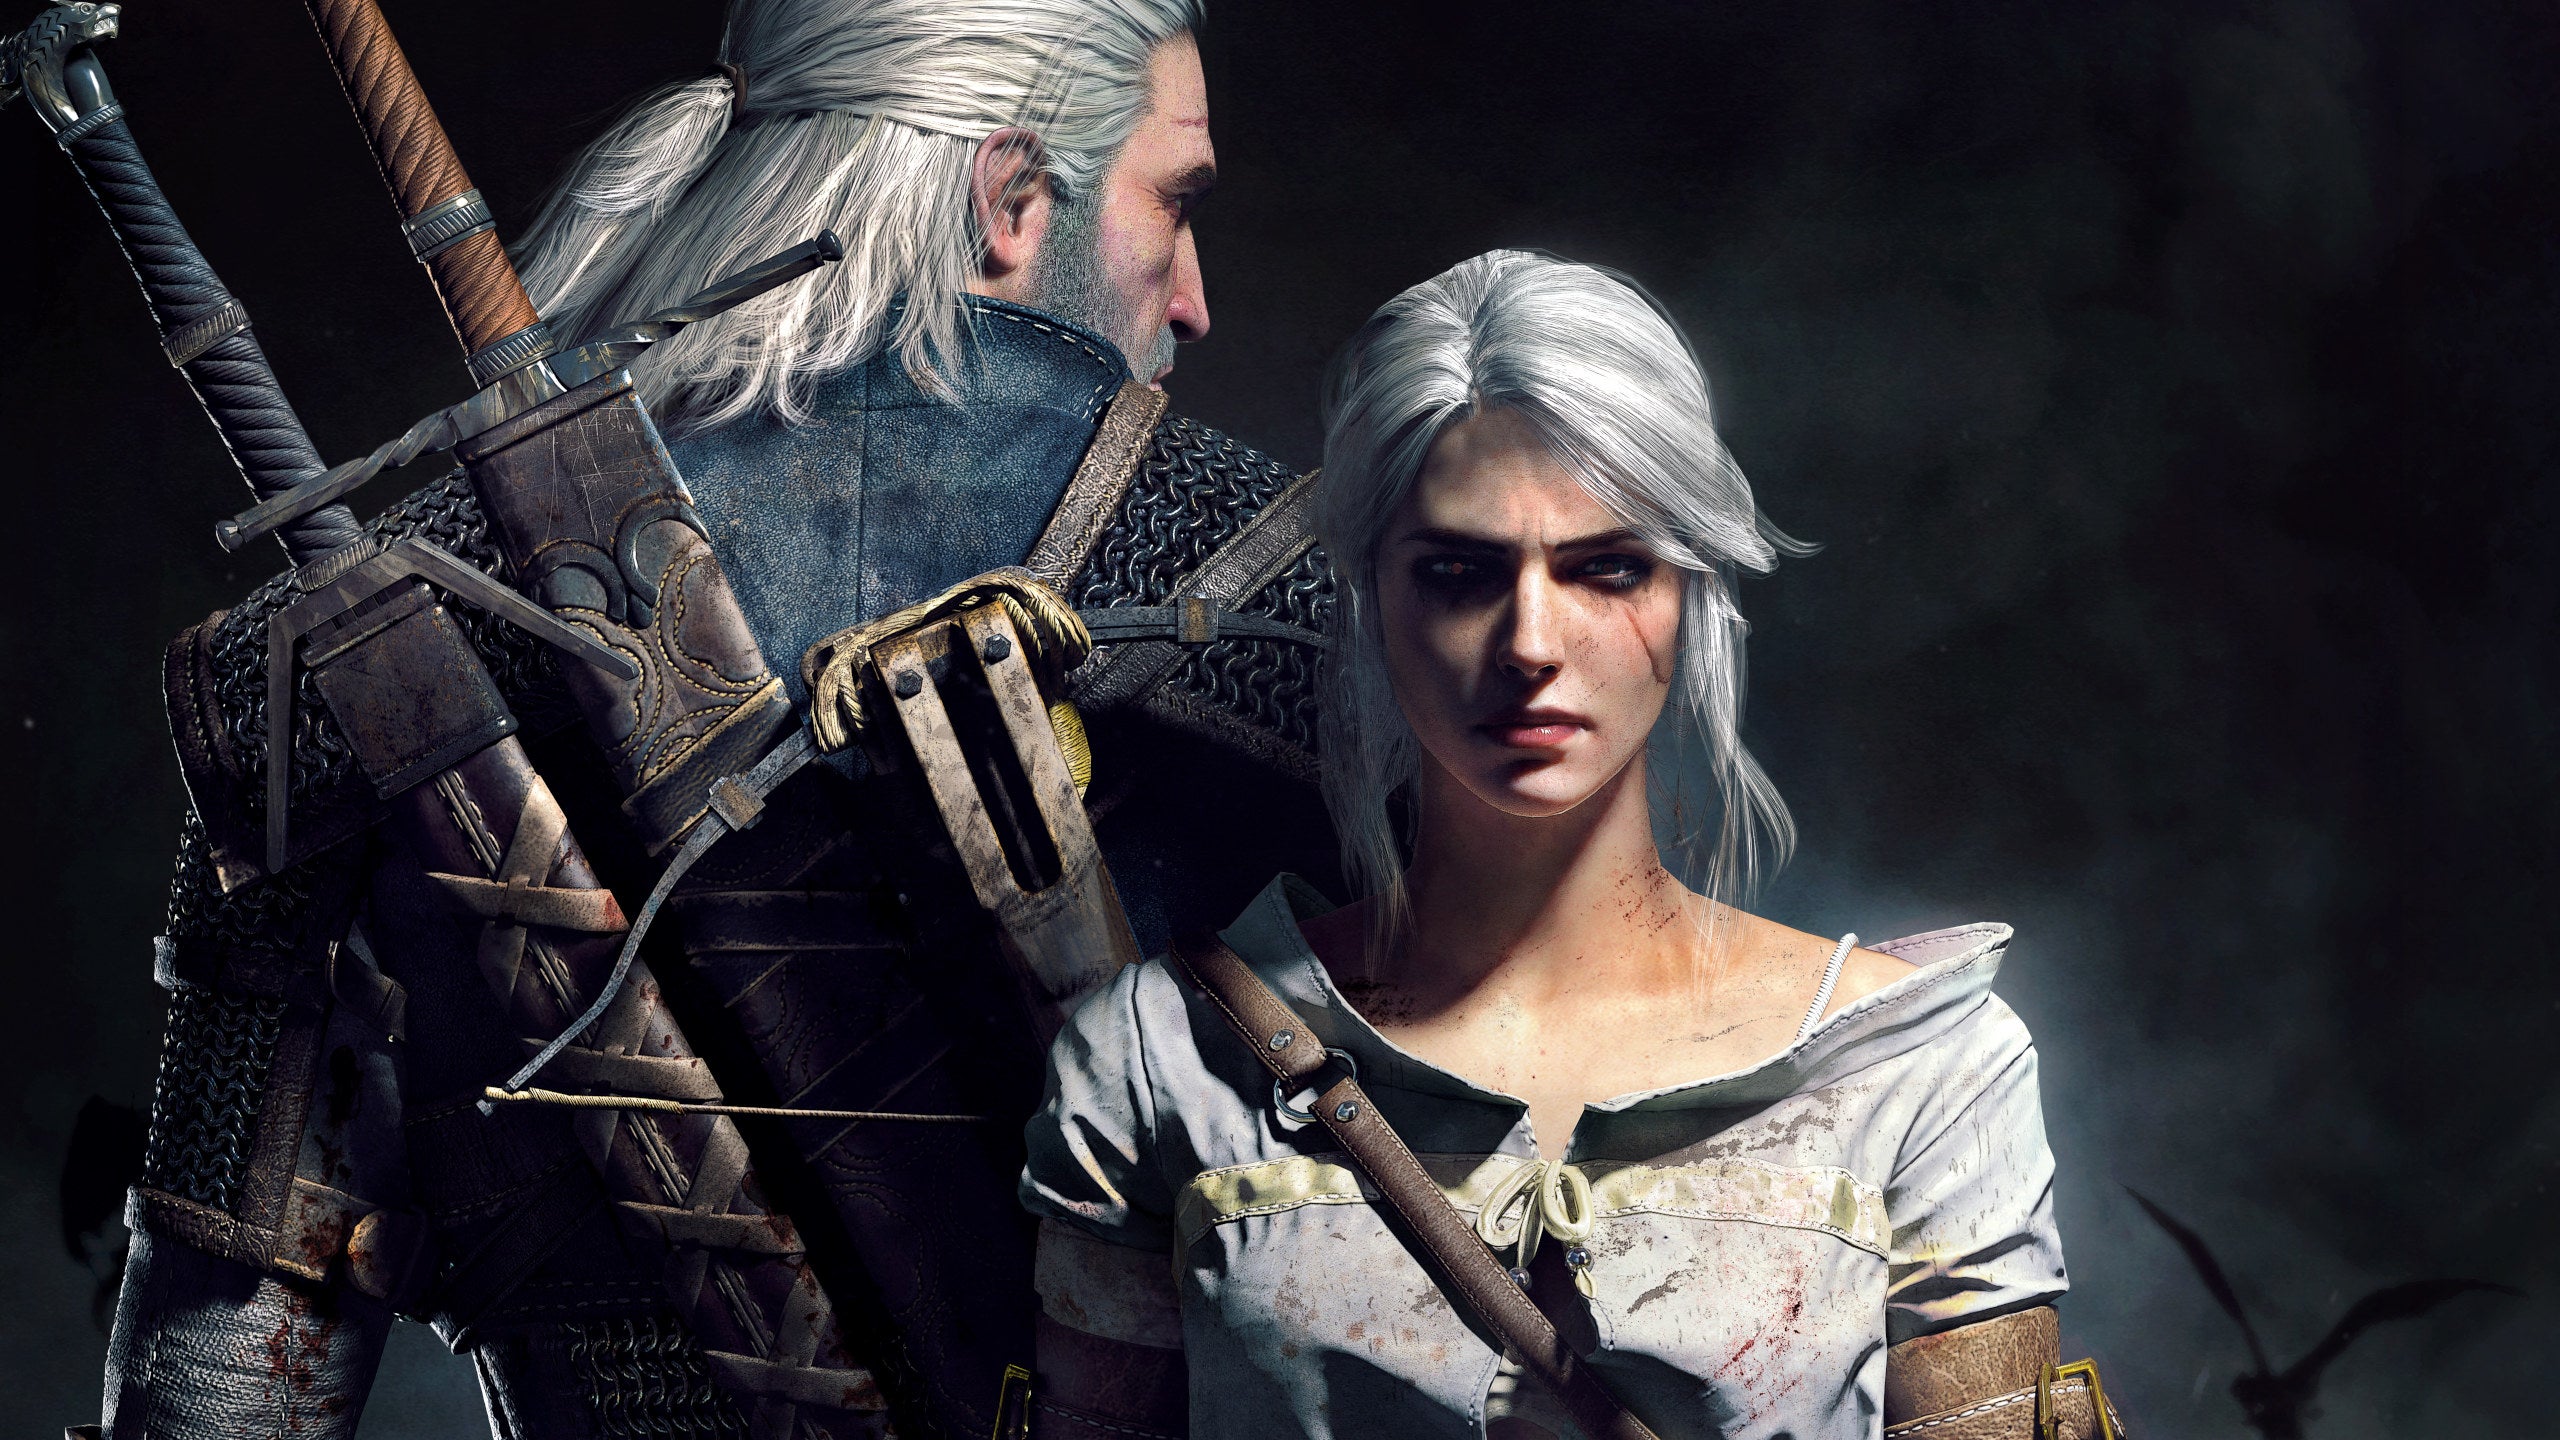 Geralt and Ciri pose back-to-back in The Witcher 3 artwork.